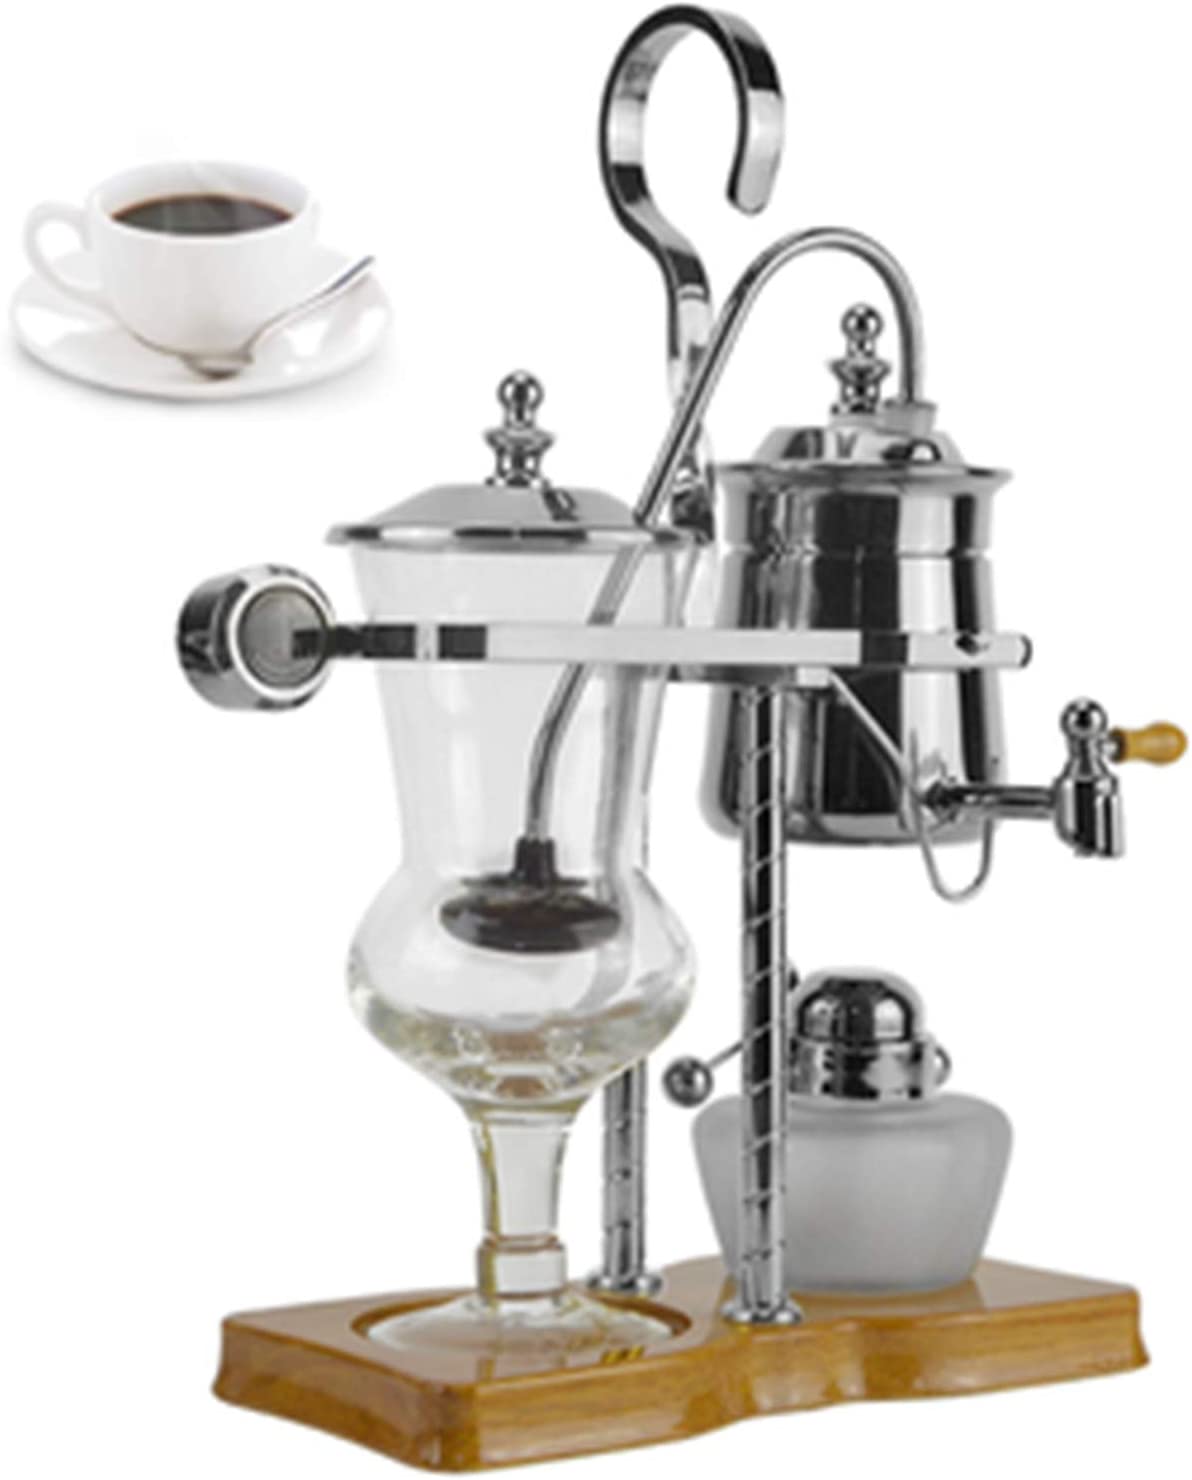 BNMY Siphonic Coffee Pot - Belgium Royal Family Balance Siphon Coffee Machine Classic and Elegant Retro Design Easy to Clean, Gold